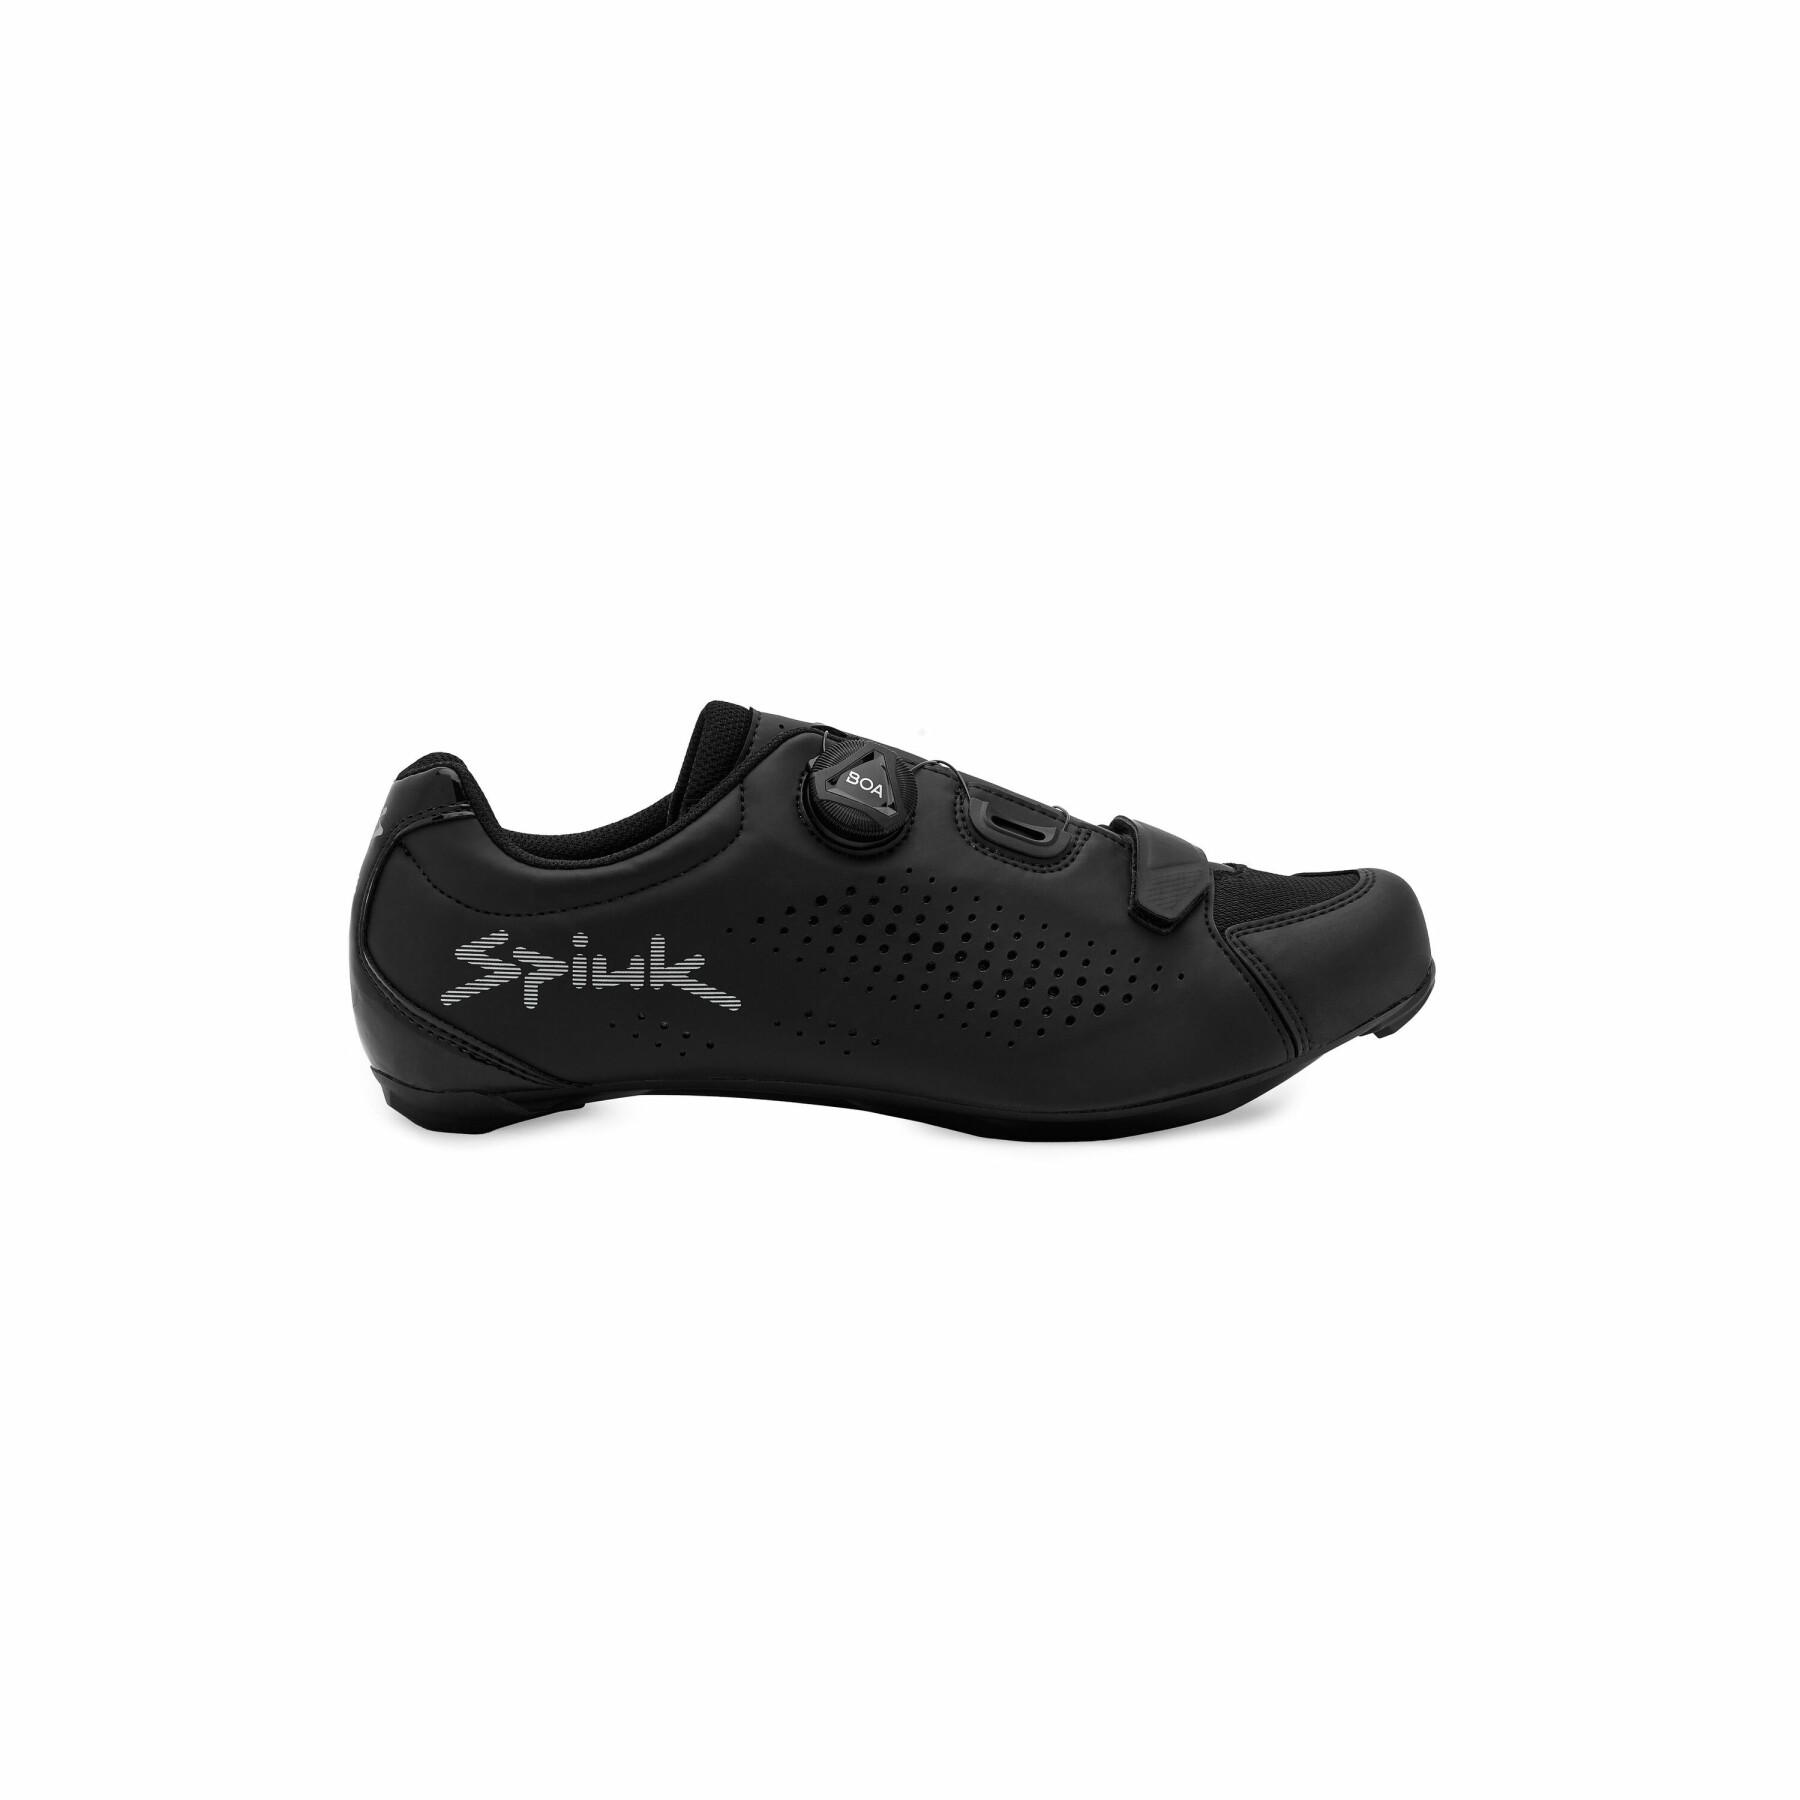 Buty rowerowe Spiuk Caray Road